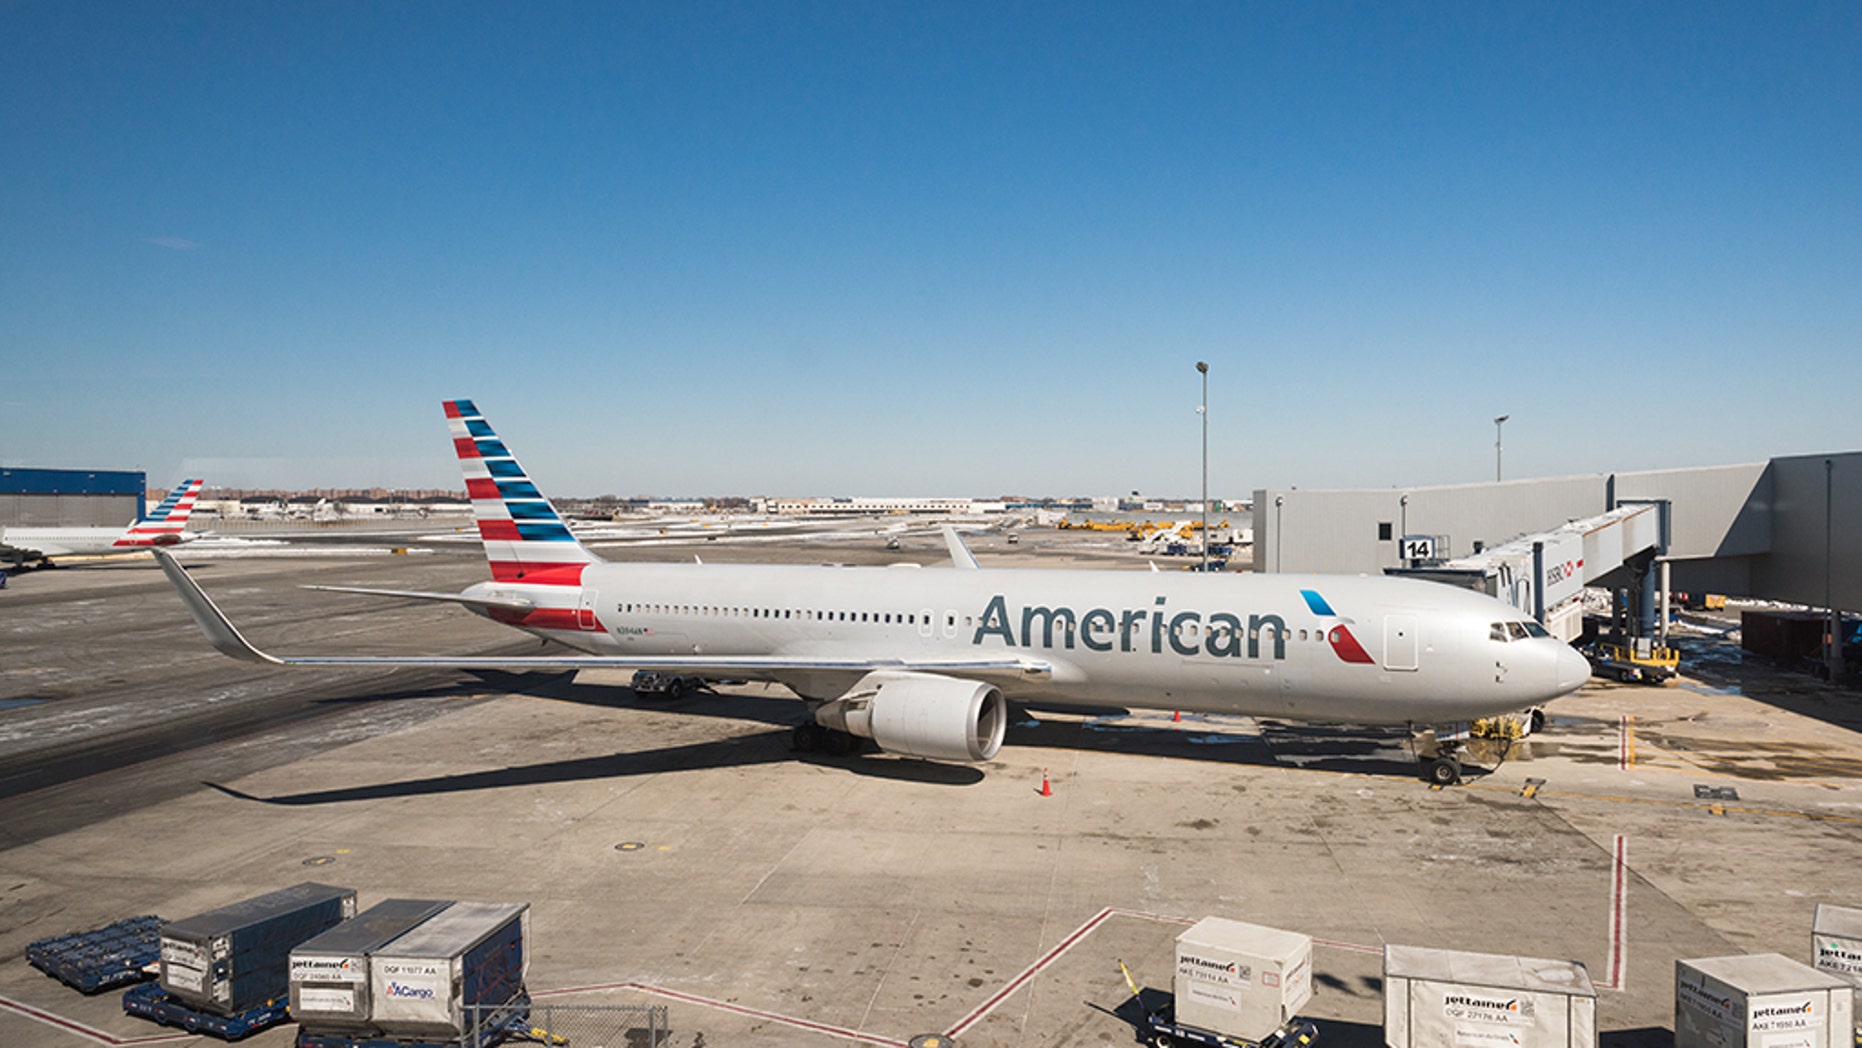 American Airlines kicks family off flight because passengers complained of body odor